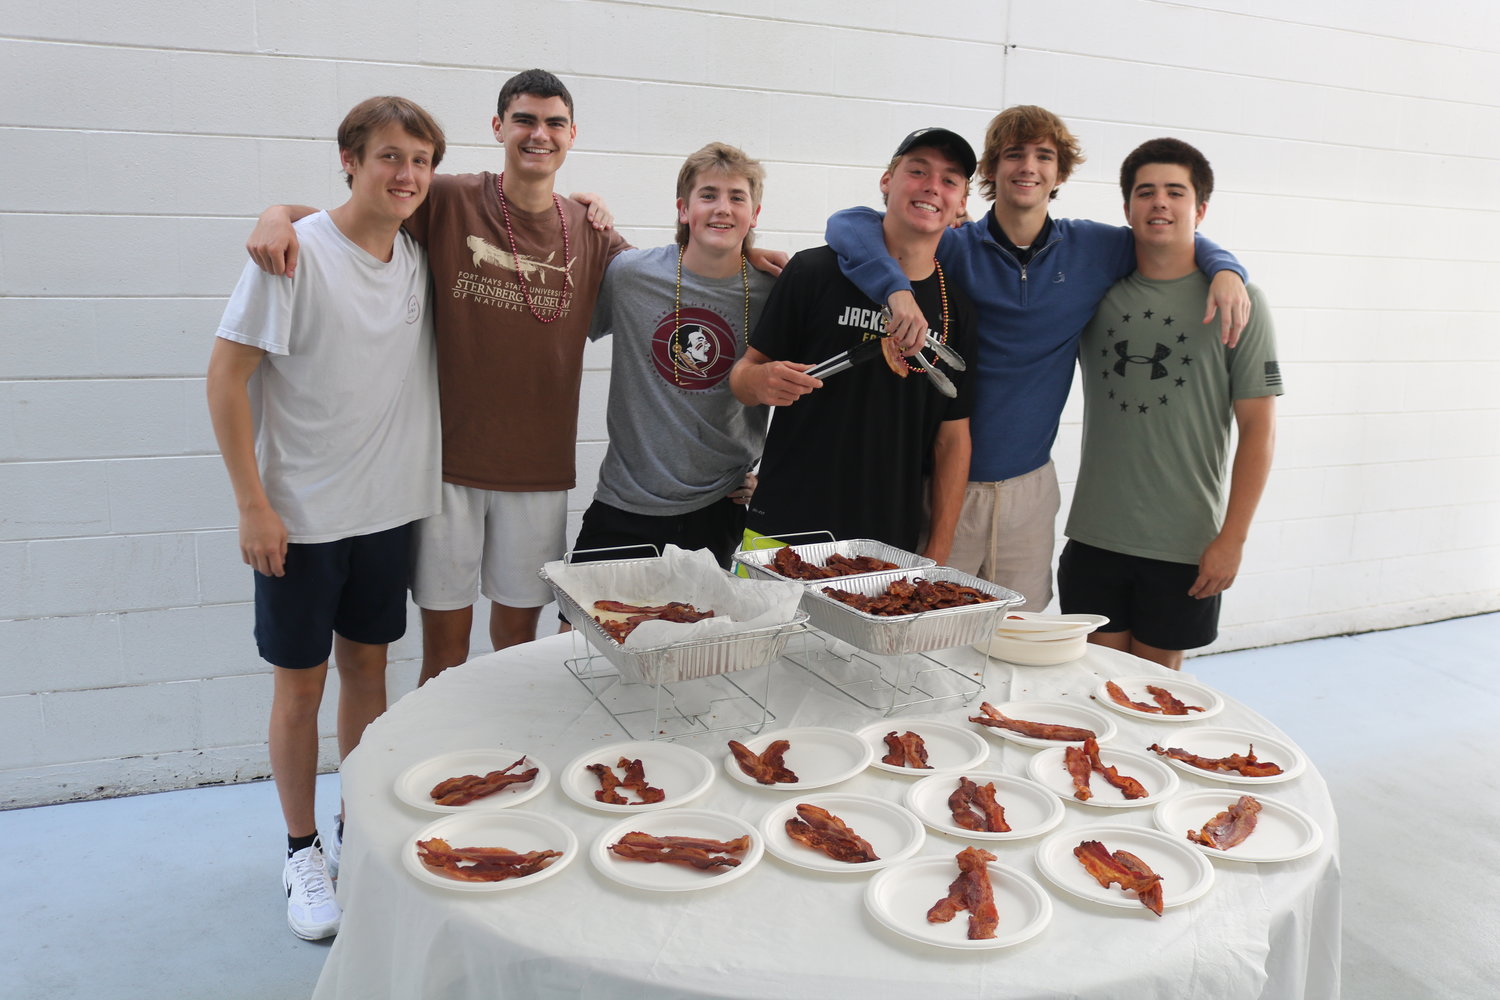 Roughly 1,500 slabs of bacon were cooked for the event.